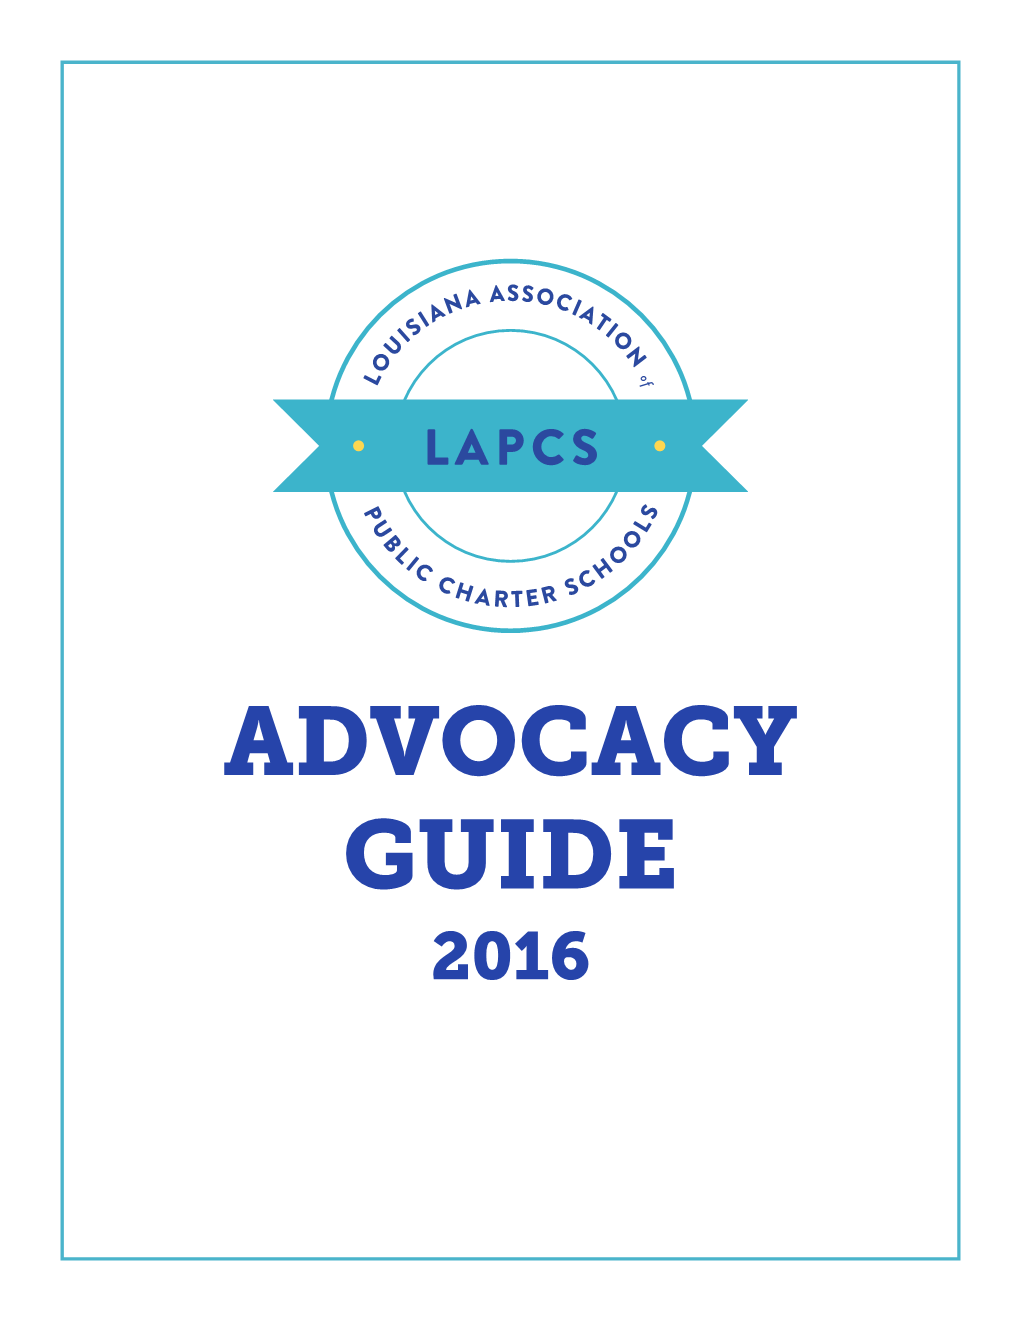 ADVOCACY GUIDE 2016 Talking to an Elected Official: the Basics